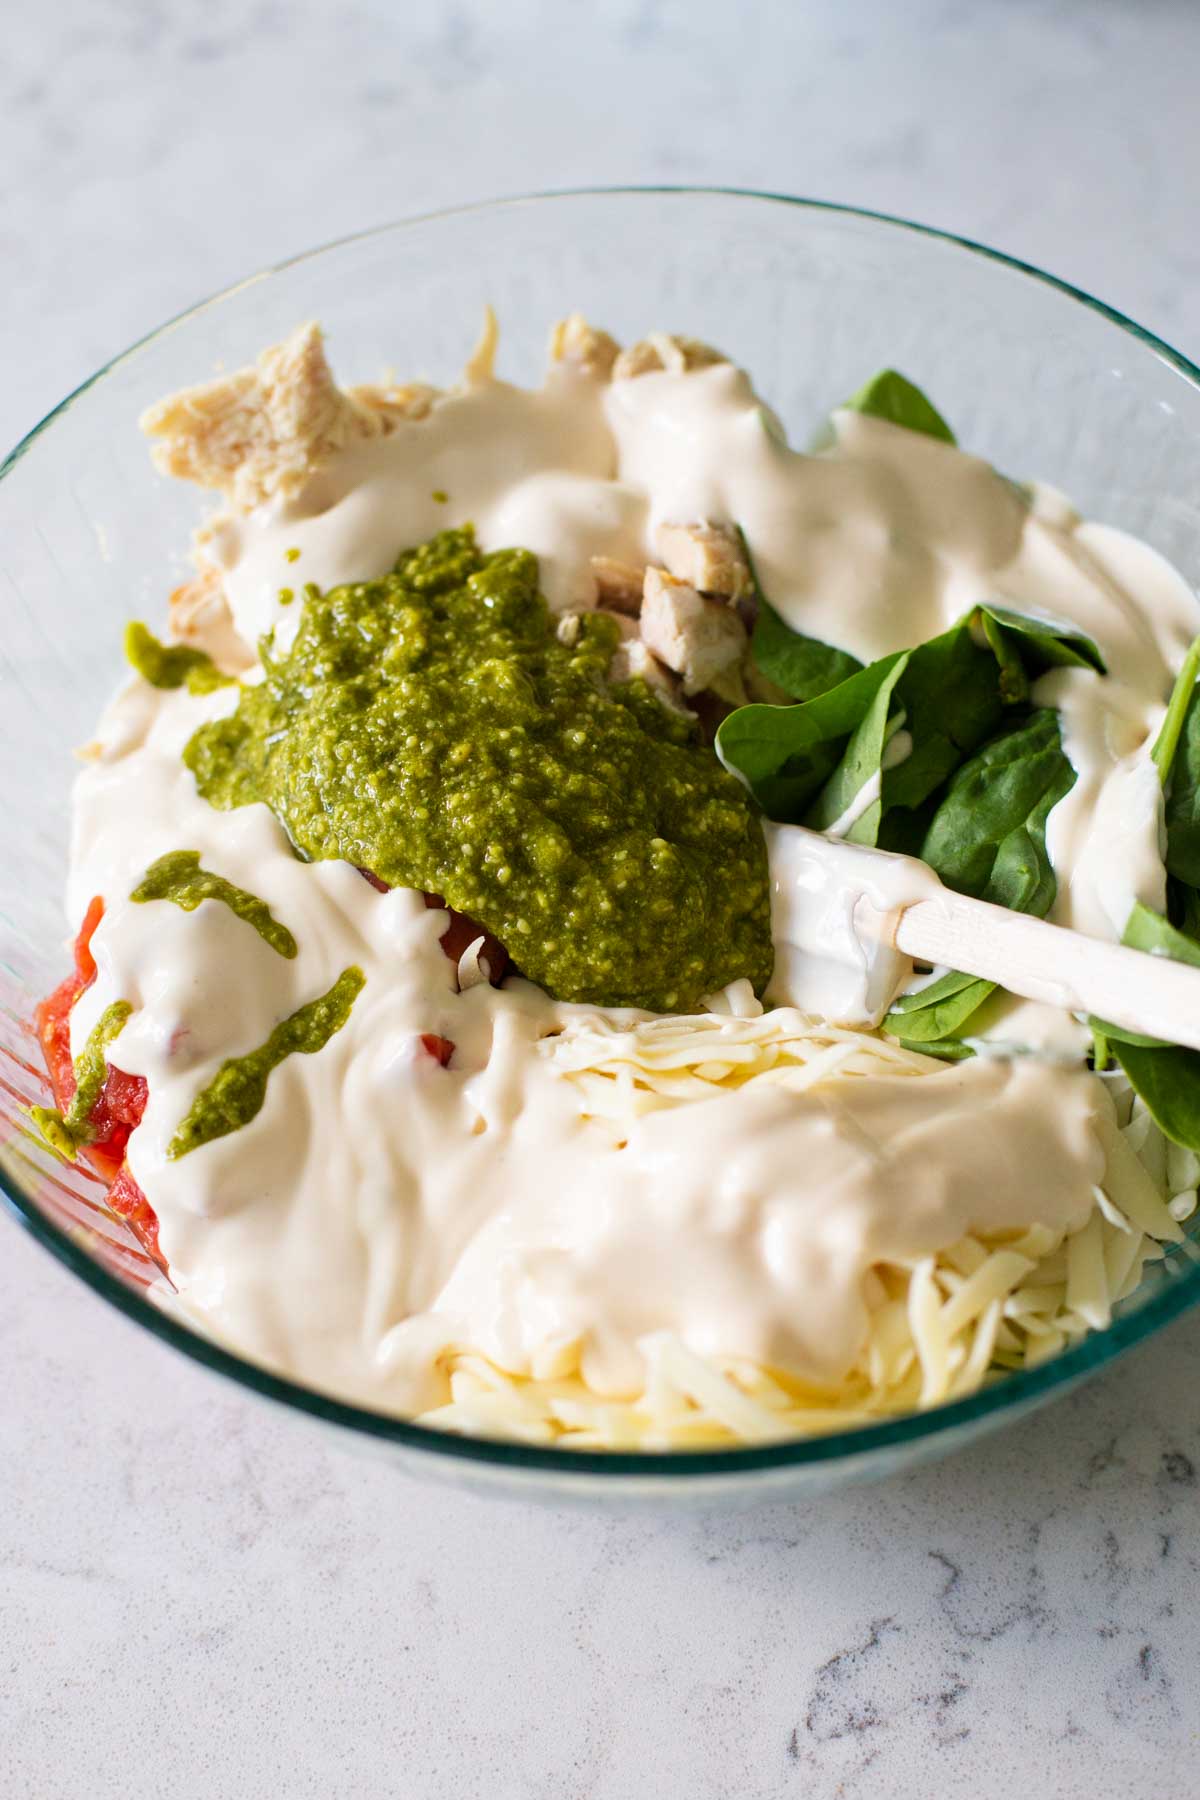 The alfredo sauce and pesto sauce have been added to the mixing bowl.